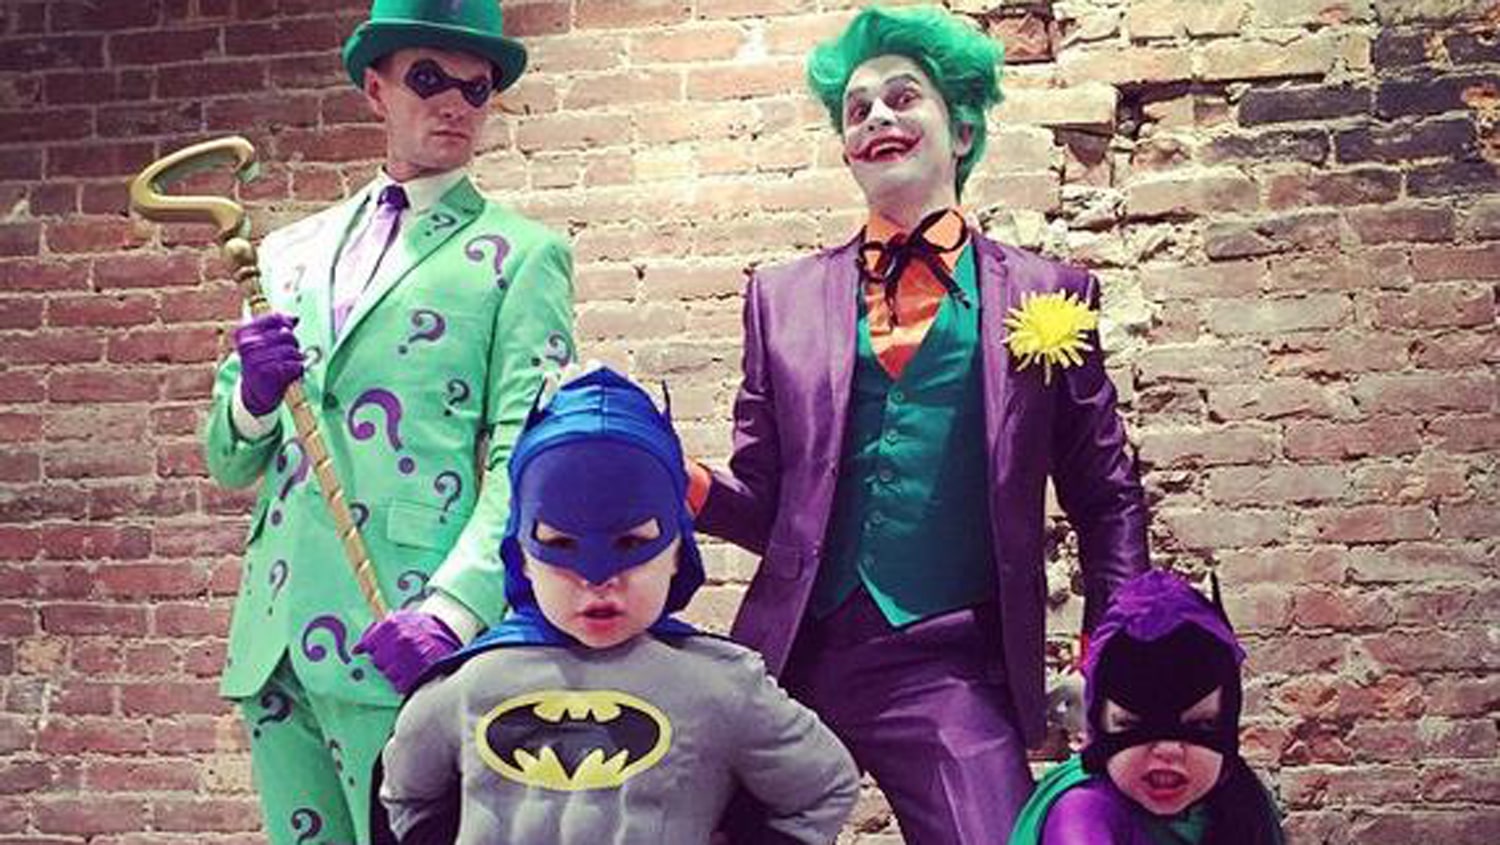 Neil Patrick Harris reveals Halloween costumes as his family goes Gotham